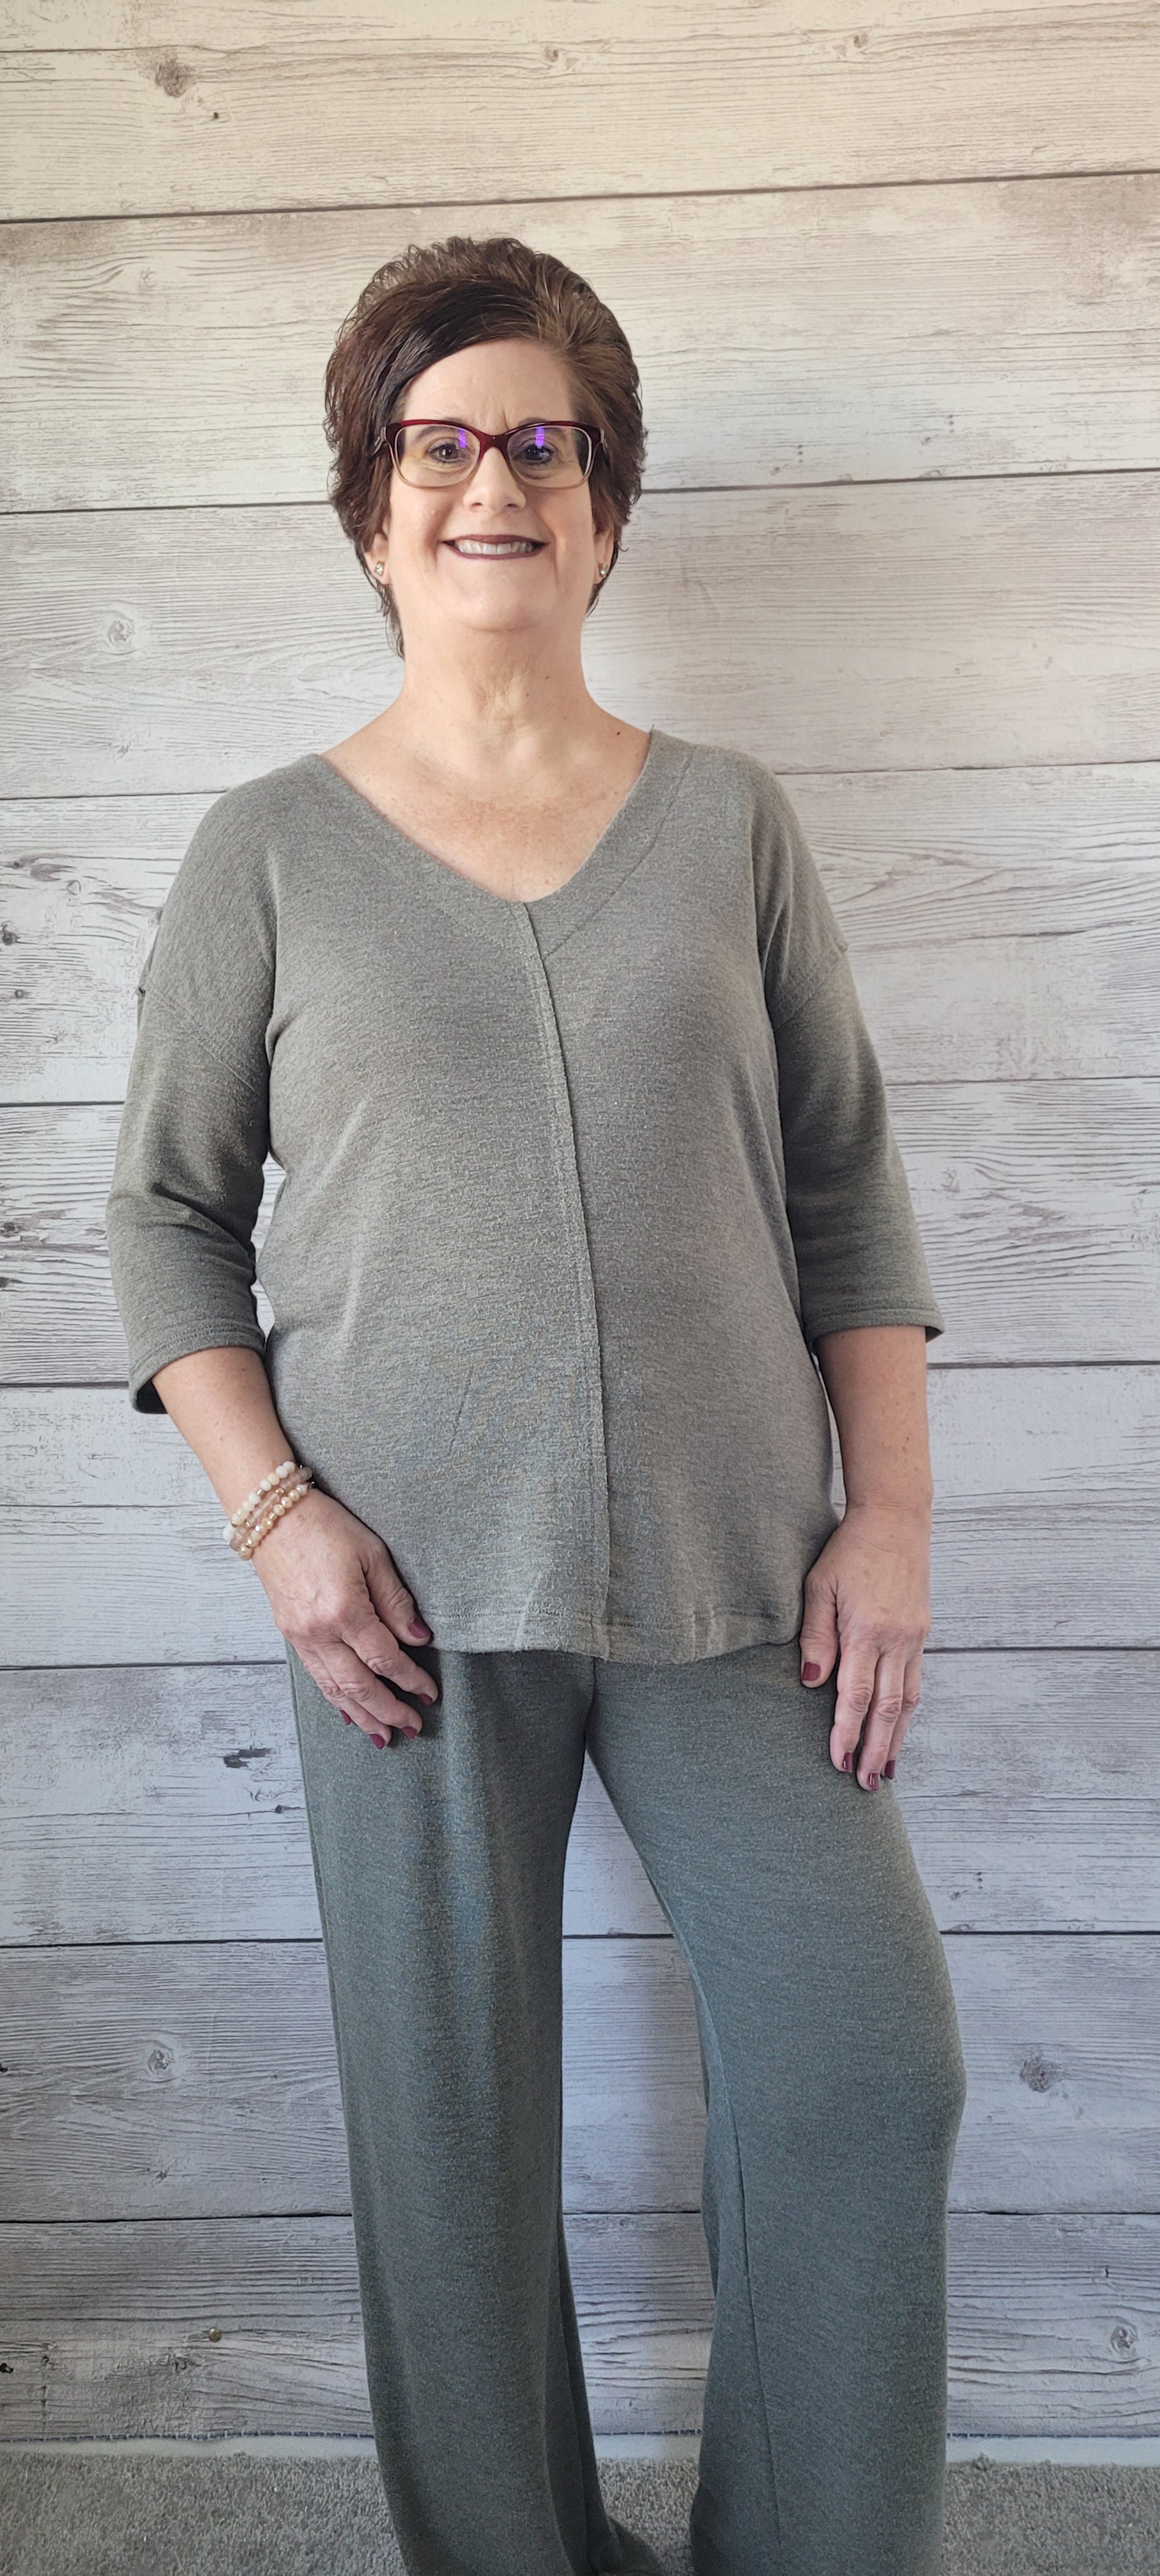 Step out in style in this comfy cropped lounge set! Its deep v-neck pullover features cut edge detail and half sleeves, while the comfy wide leg pants come with an elastic waistband and drawstring for the perfect fit. With rounded bottom hem and drop shoulder, this set is sure to take your look to the next level! Let’s get comfy and stylish, shall we? Sizes small through large.